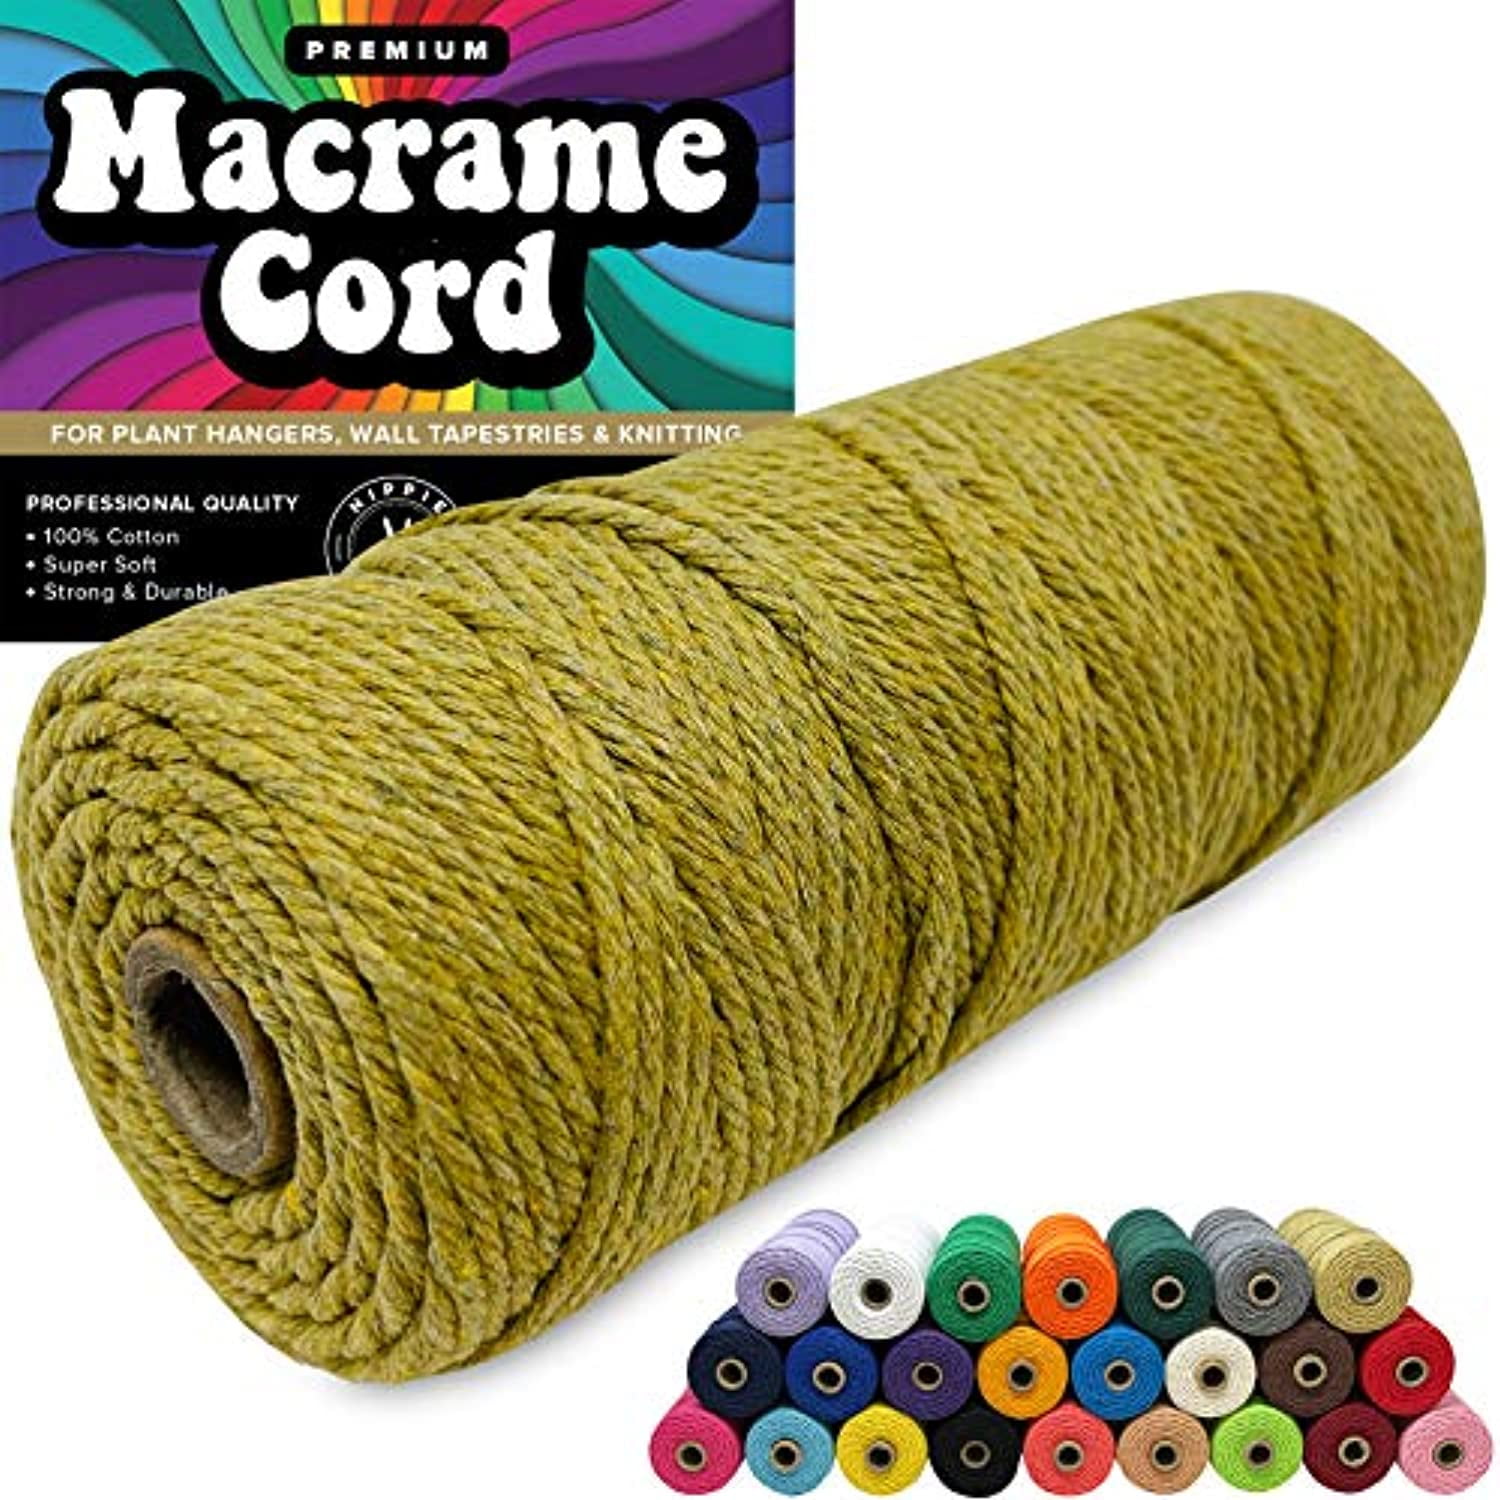  Likeecords Single Strand Macrame Cord 4mm x 110yards, 100%  Cotton Macrame Rope,Colored Macrame Supplies for DIY Crafts, Wall Hangings,  Plant Hangers, Holders, and Home Decorations(Brown Mixed Beige) : Arts,  Crafts 